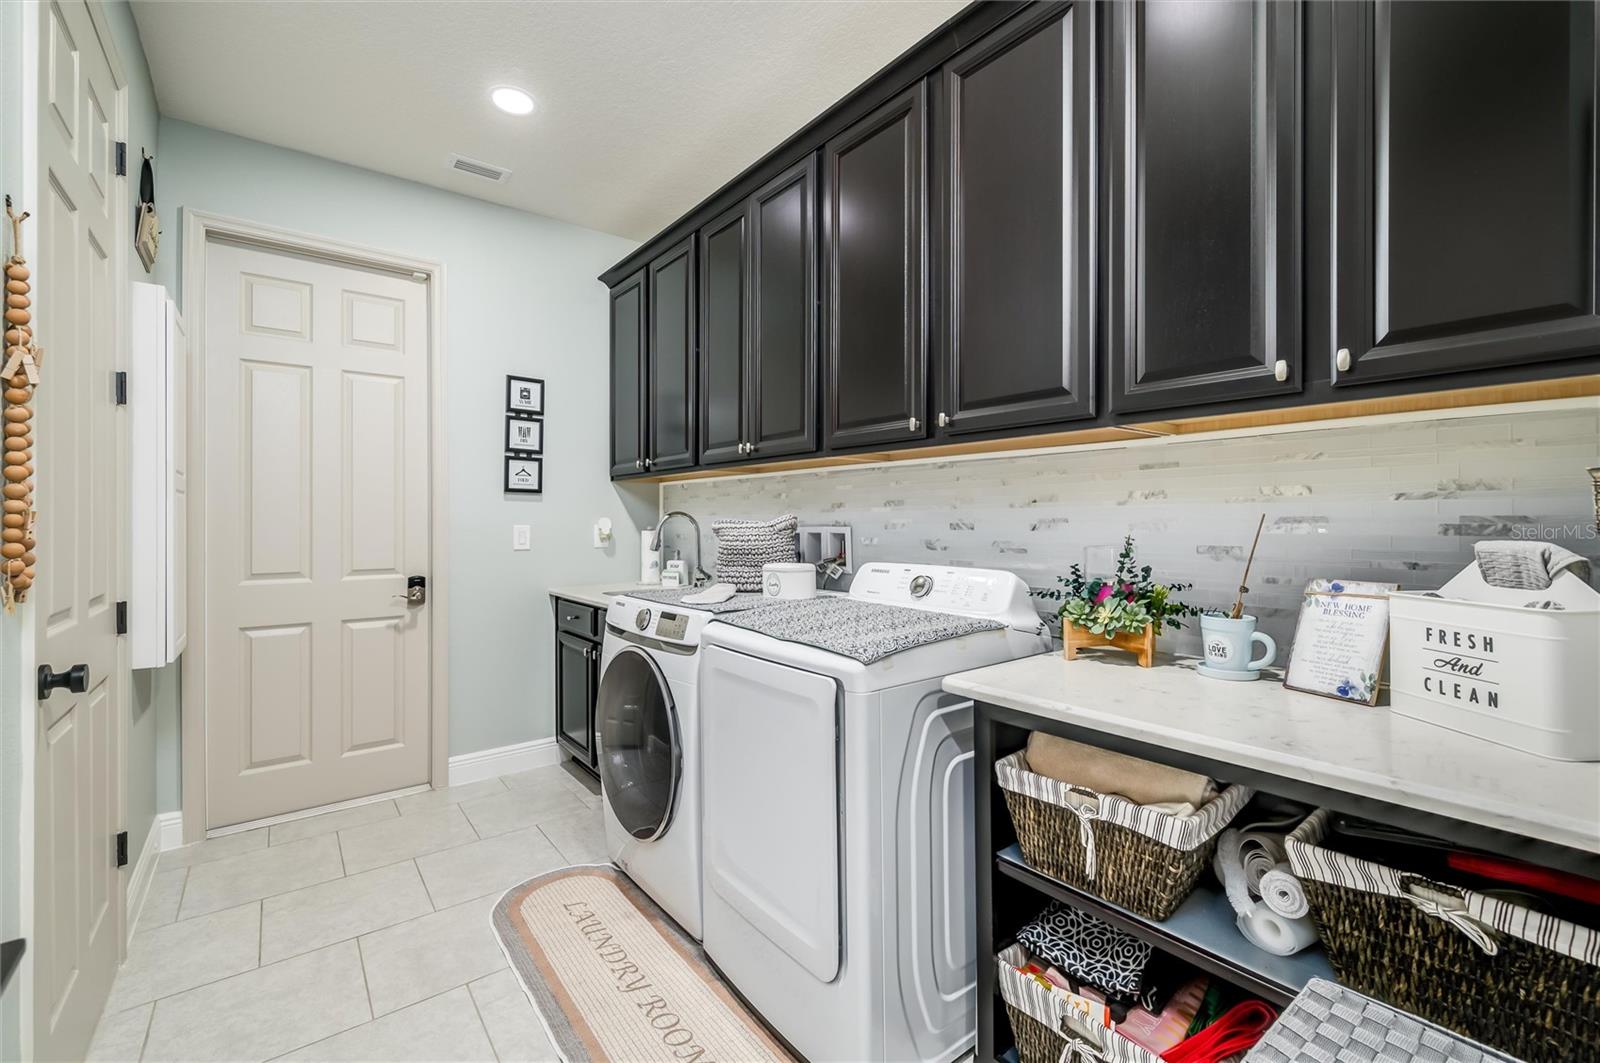 Laundry with tub and freezer included